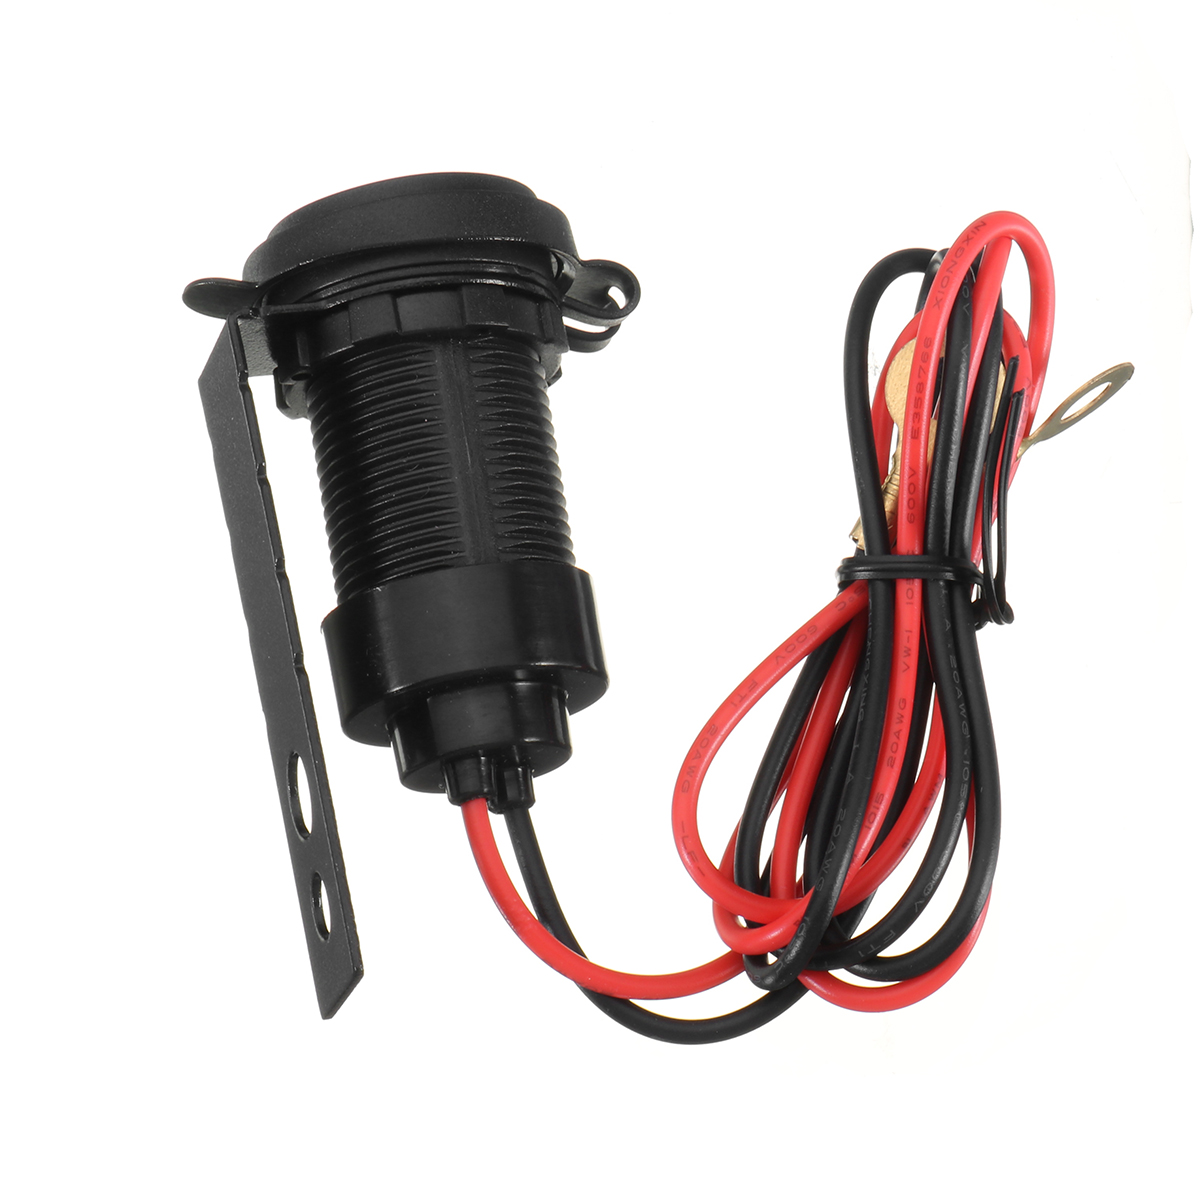 12V 1A USB Socket Charger with Waterproof Cap for BMW Motorcycle - Auto GoShop